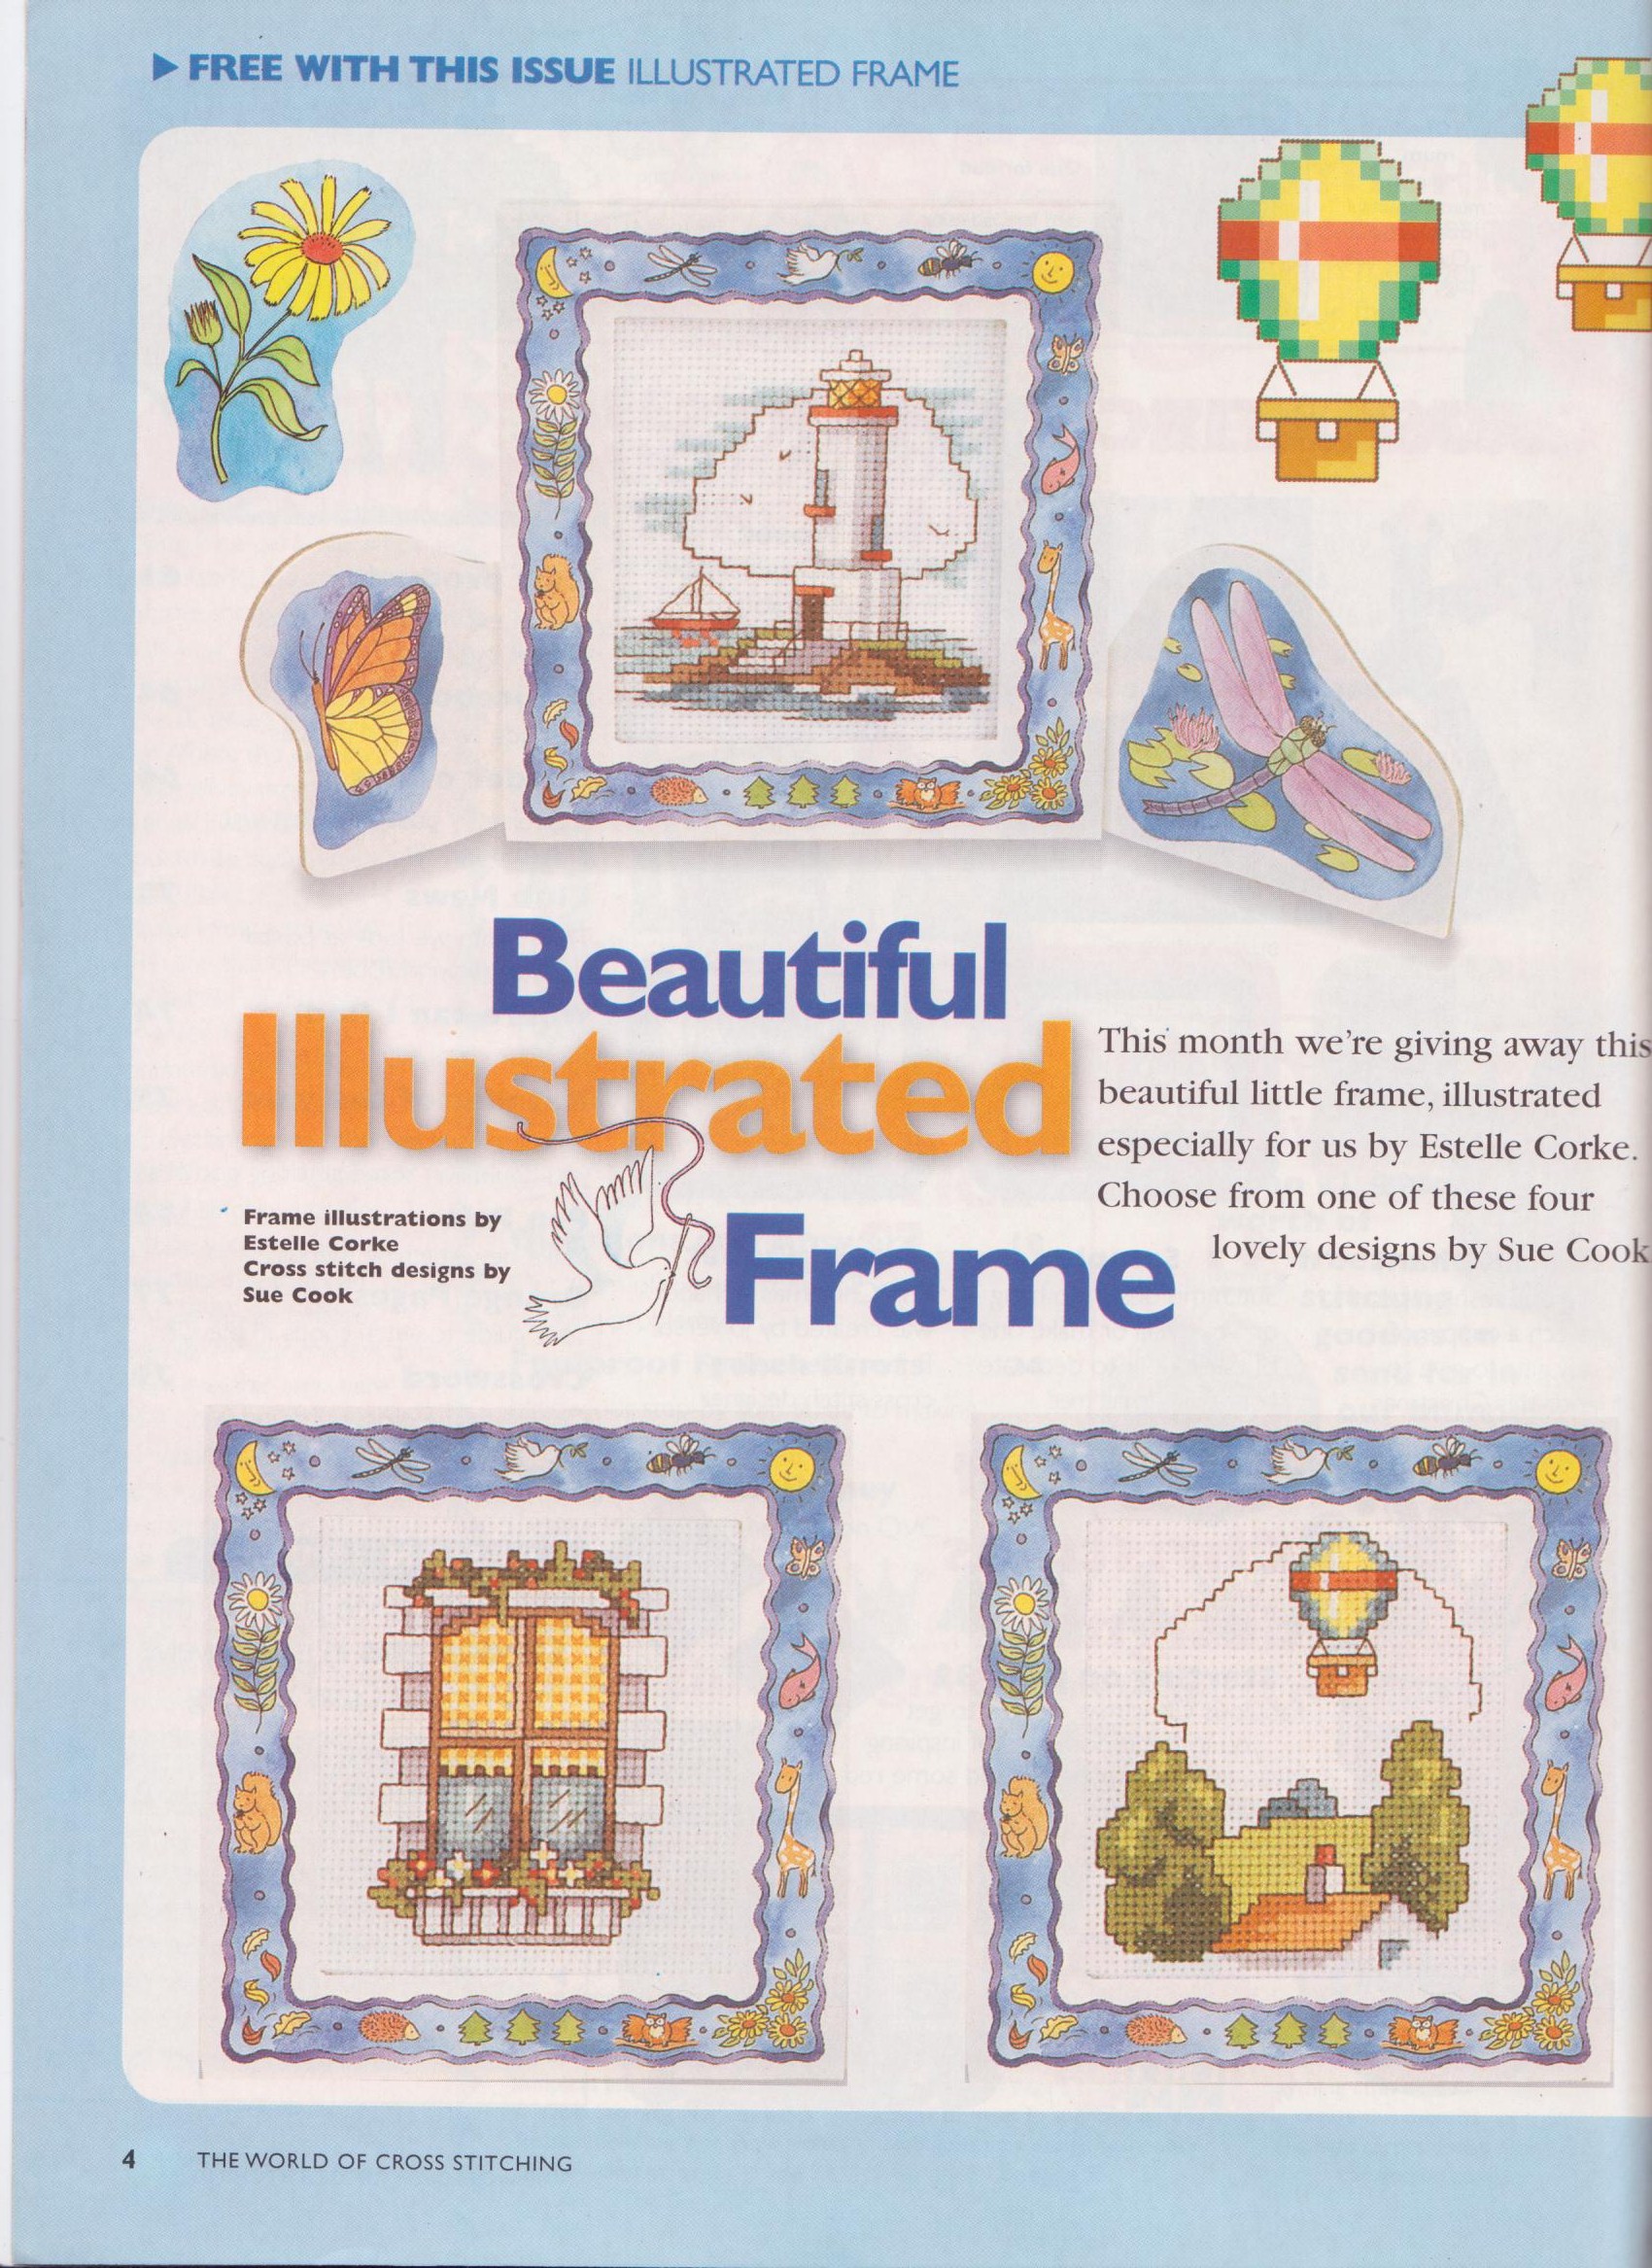 Cross stitch frames with a lighthouse and a window (1)